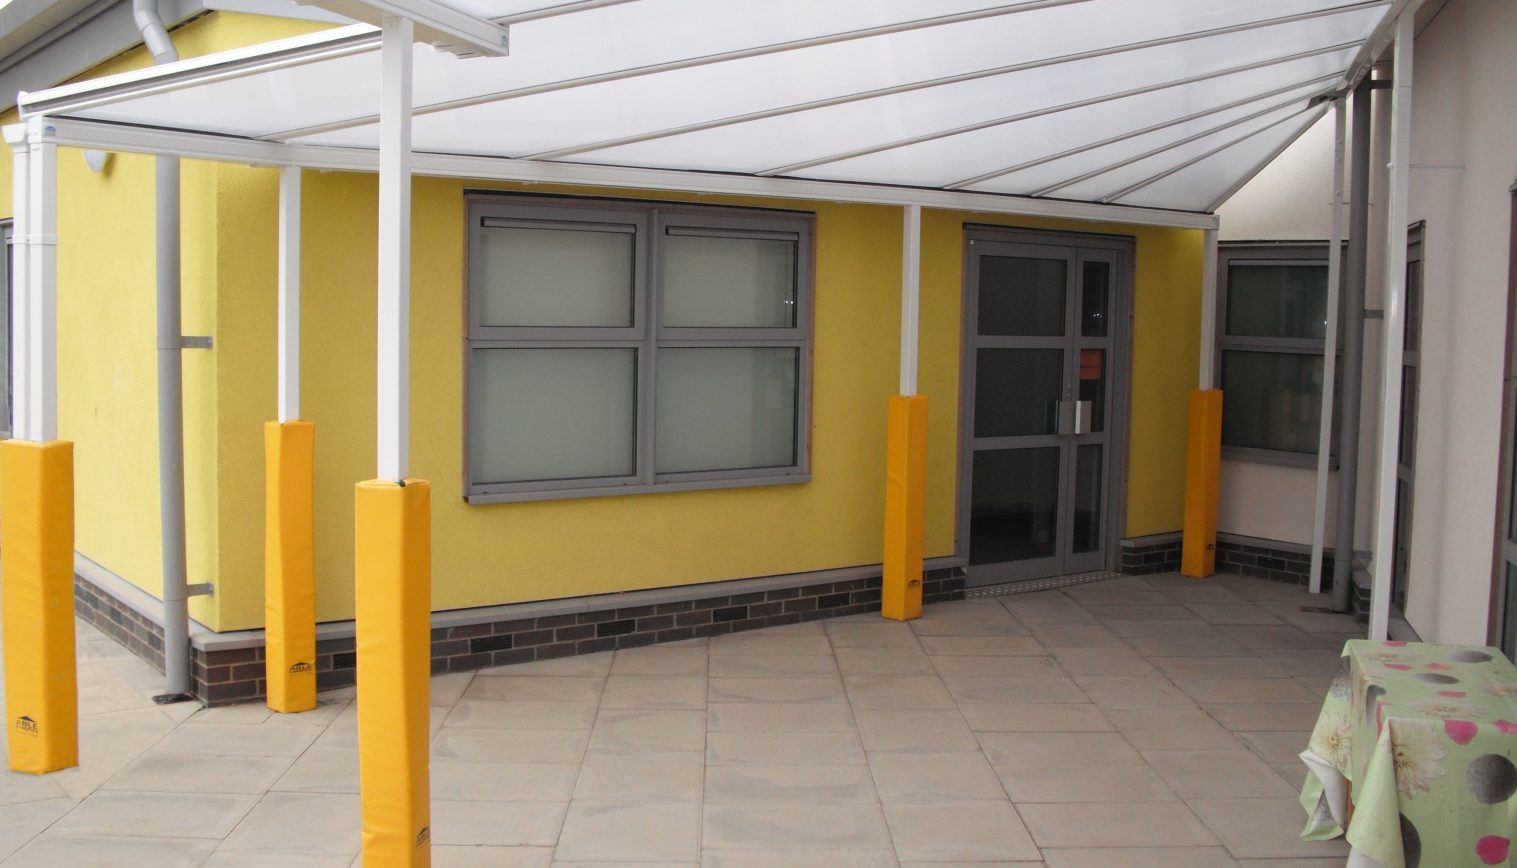 St Helen’s RC Primary School – Wall Mounted Canopy